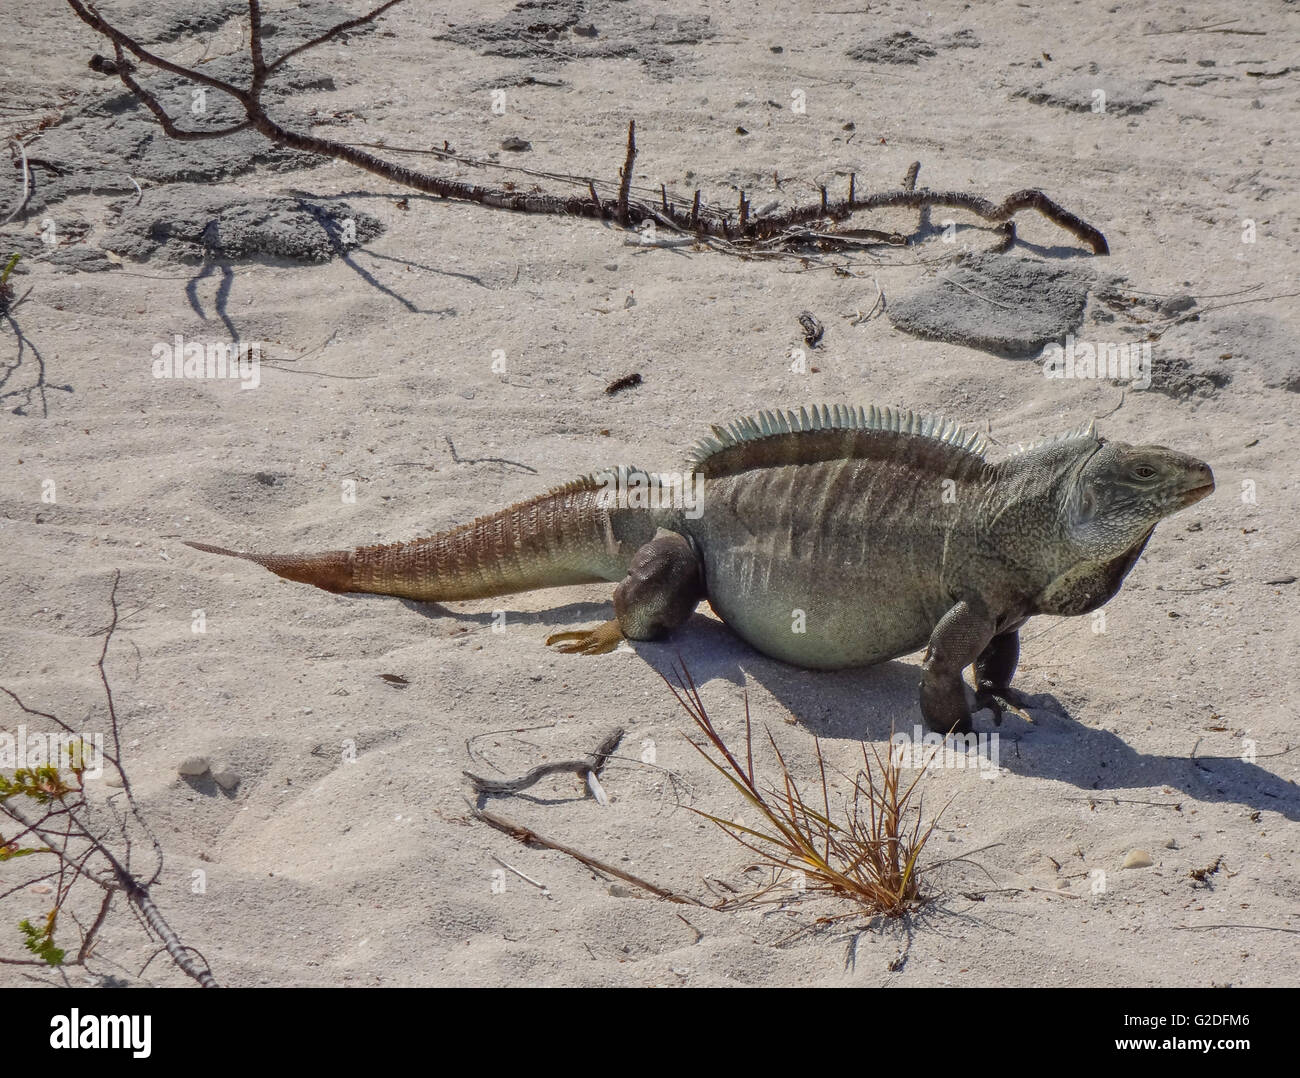 iguana standing on a sunny beach among dried wood and plants Stock Photo